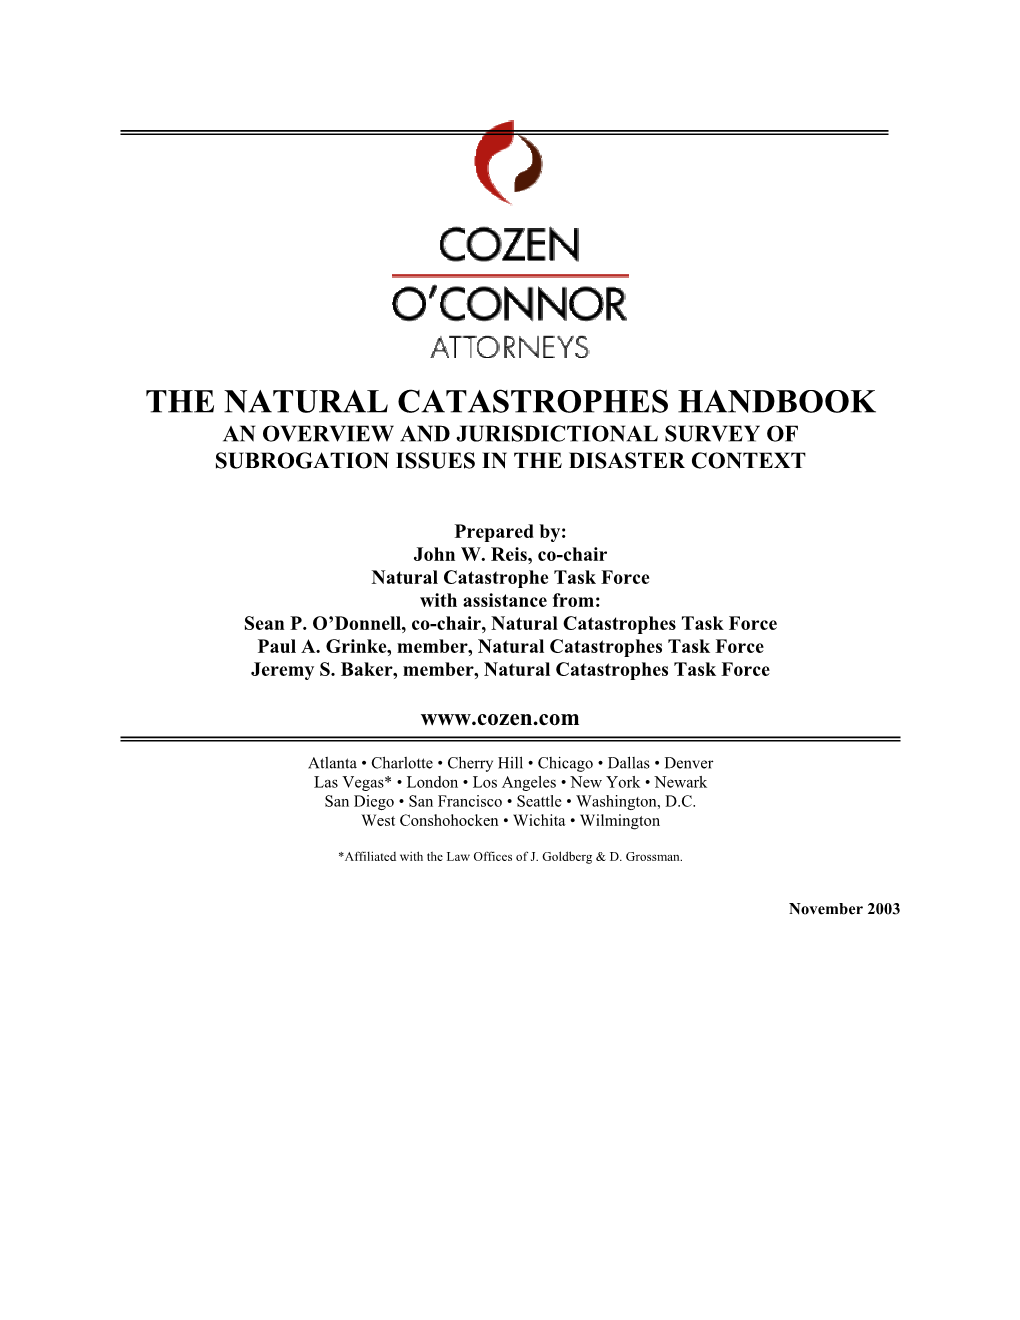 The Natural Catastrophes Handbook an Overview and Jurisdictional Survey of Subrogation Issues in the Disaster Context